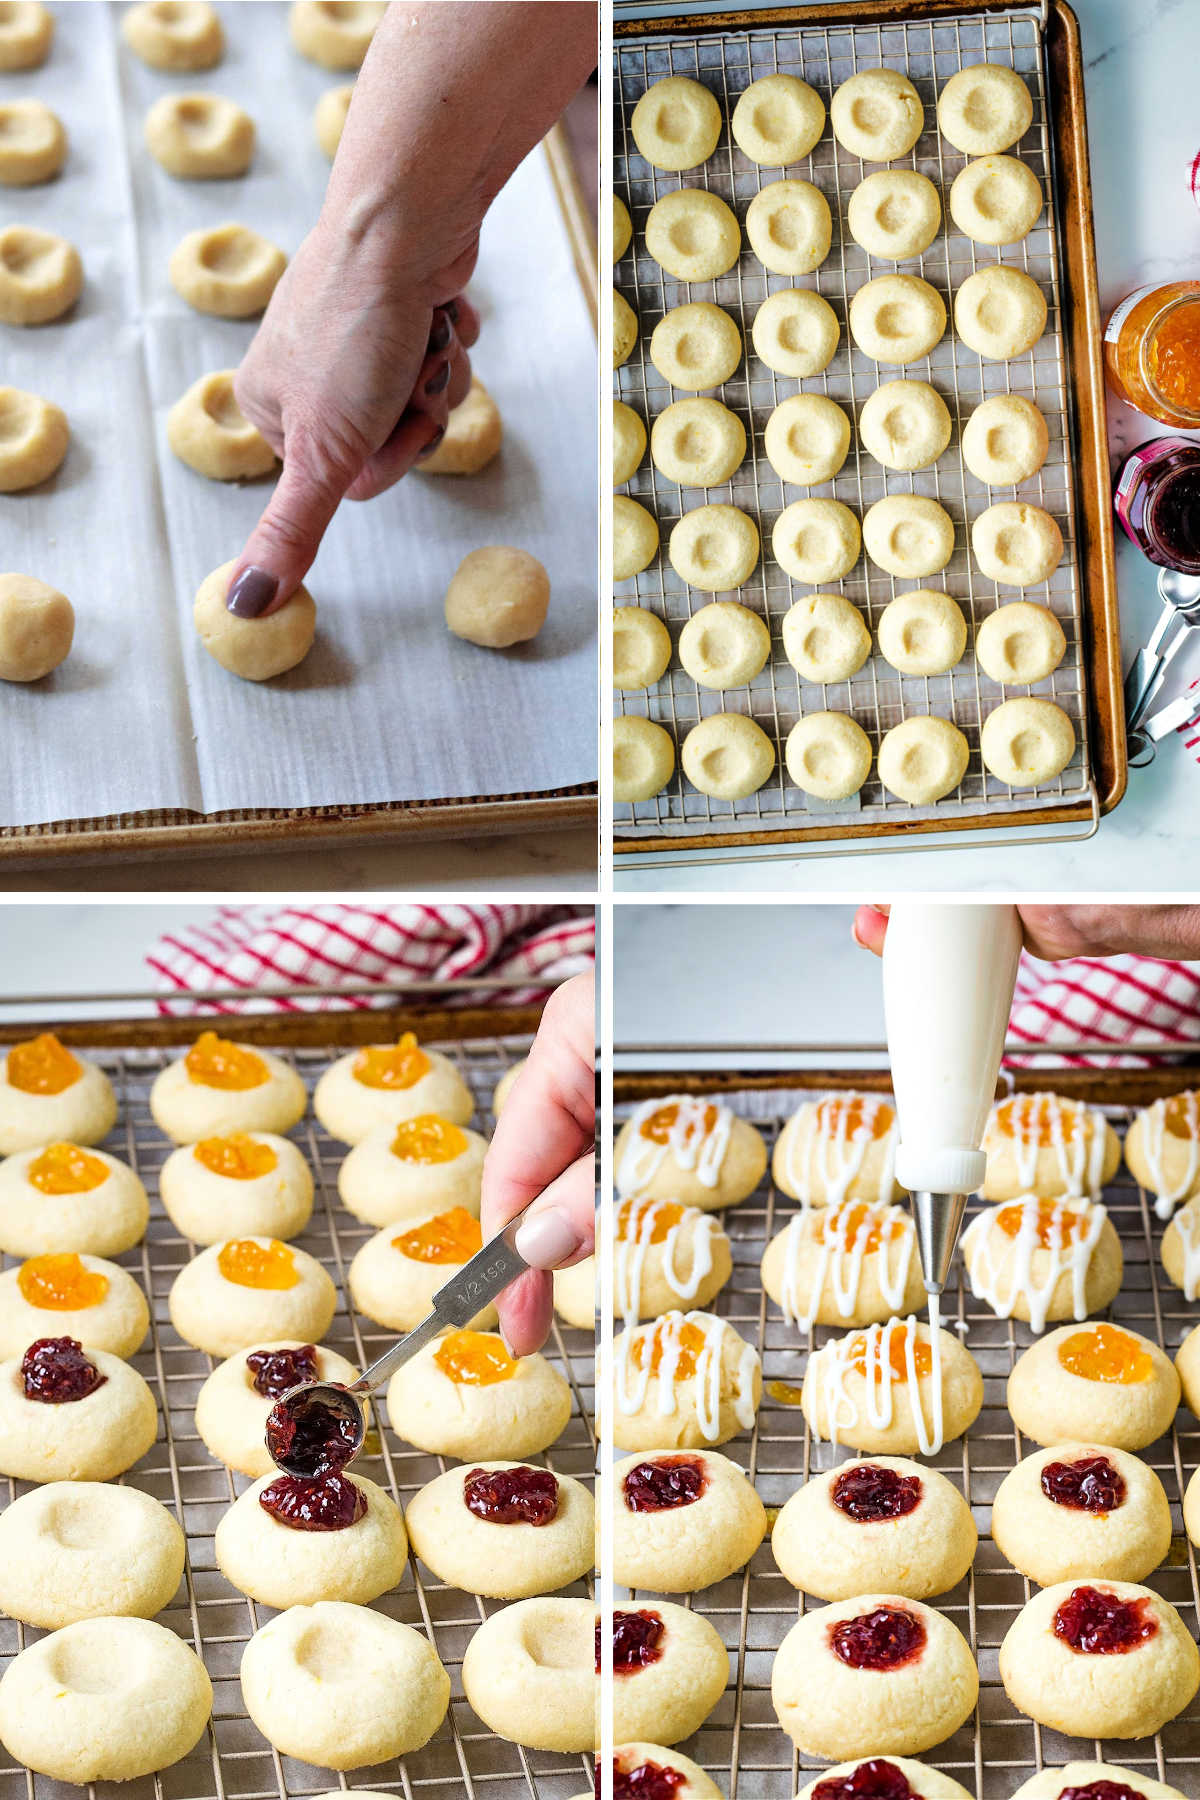 process steps for making jam thumbprint lemon shortbread cookies: press indentation with thumb into cookie dough; cool on a wire rack; fill with jam; drizzle with glaze.